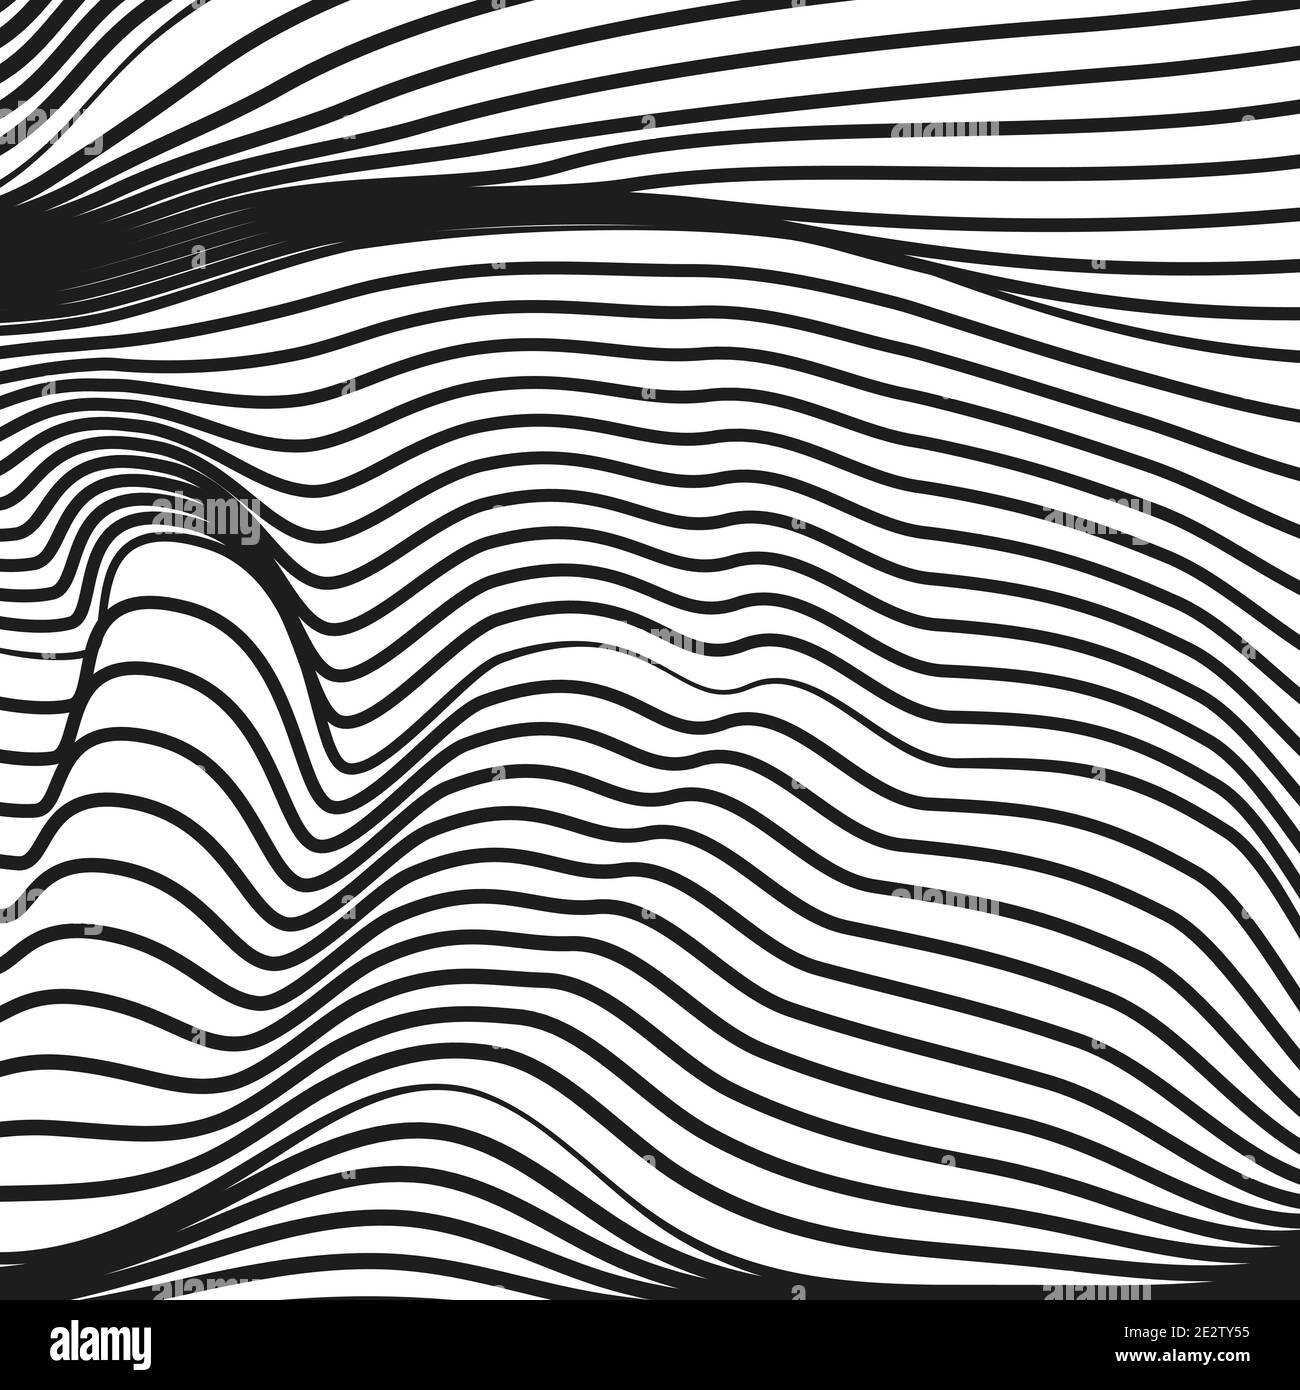 Abstract deformed surface. Black and white wavy background. Futuristic concept. Psychedelic art line pattern. Vector visual effects. EPS10 image Stock Vector